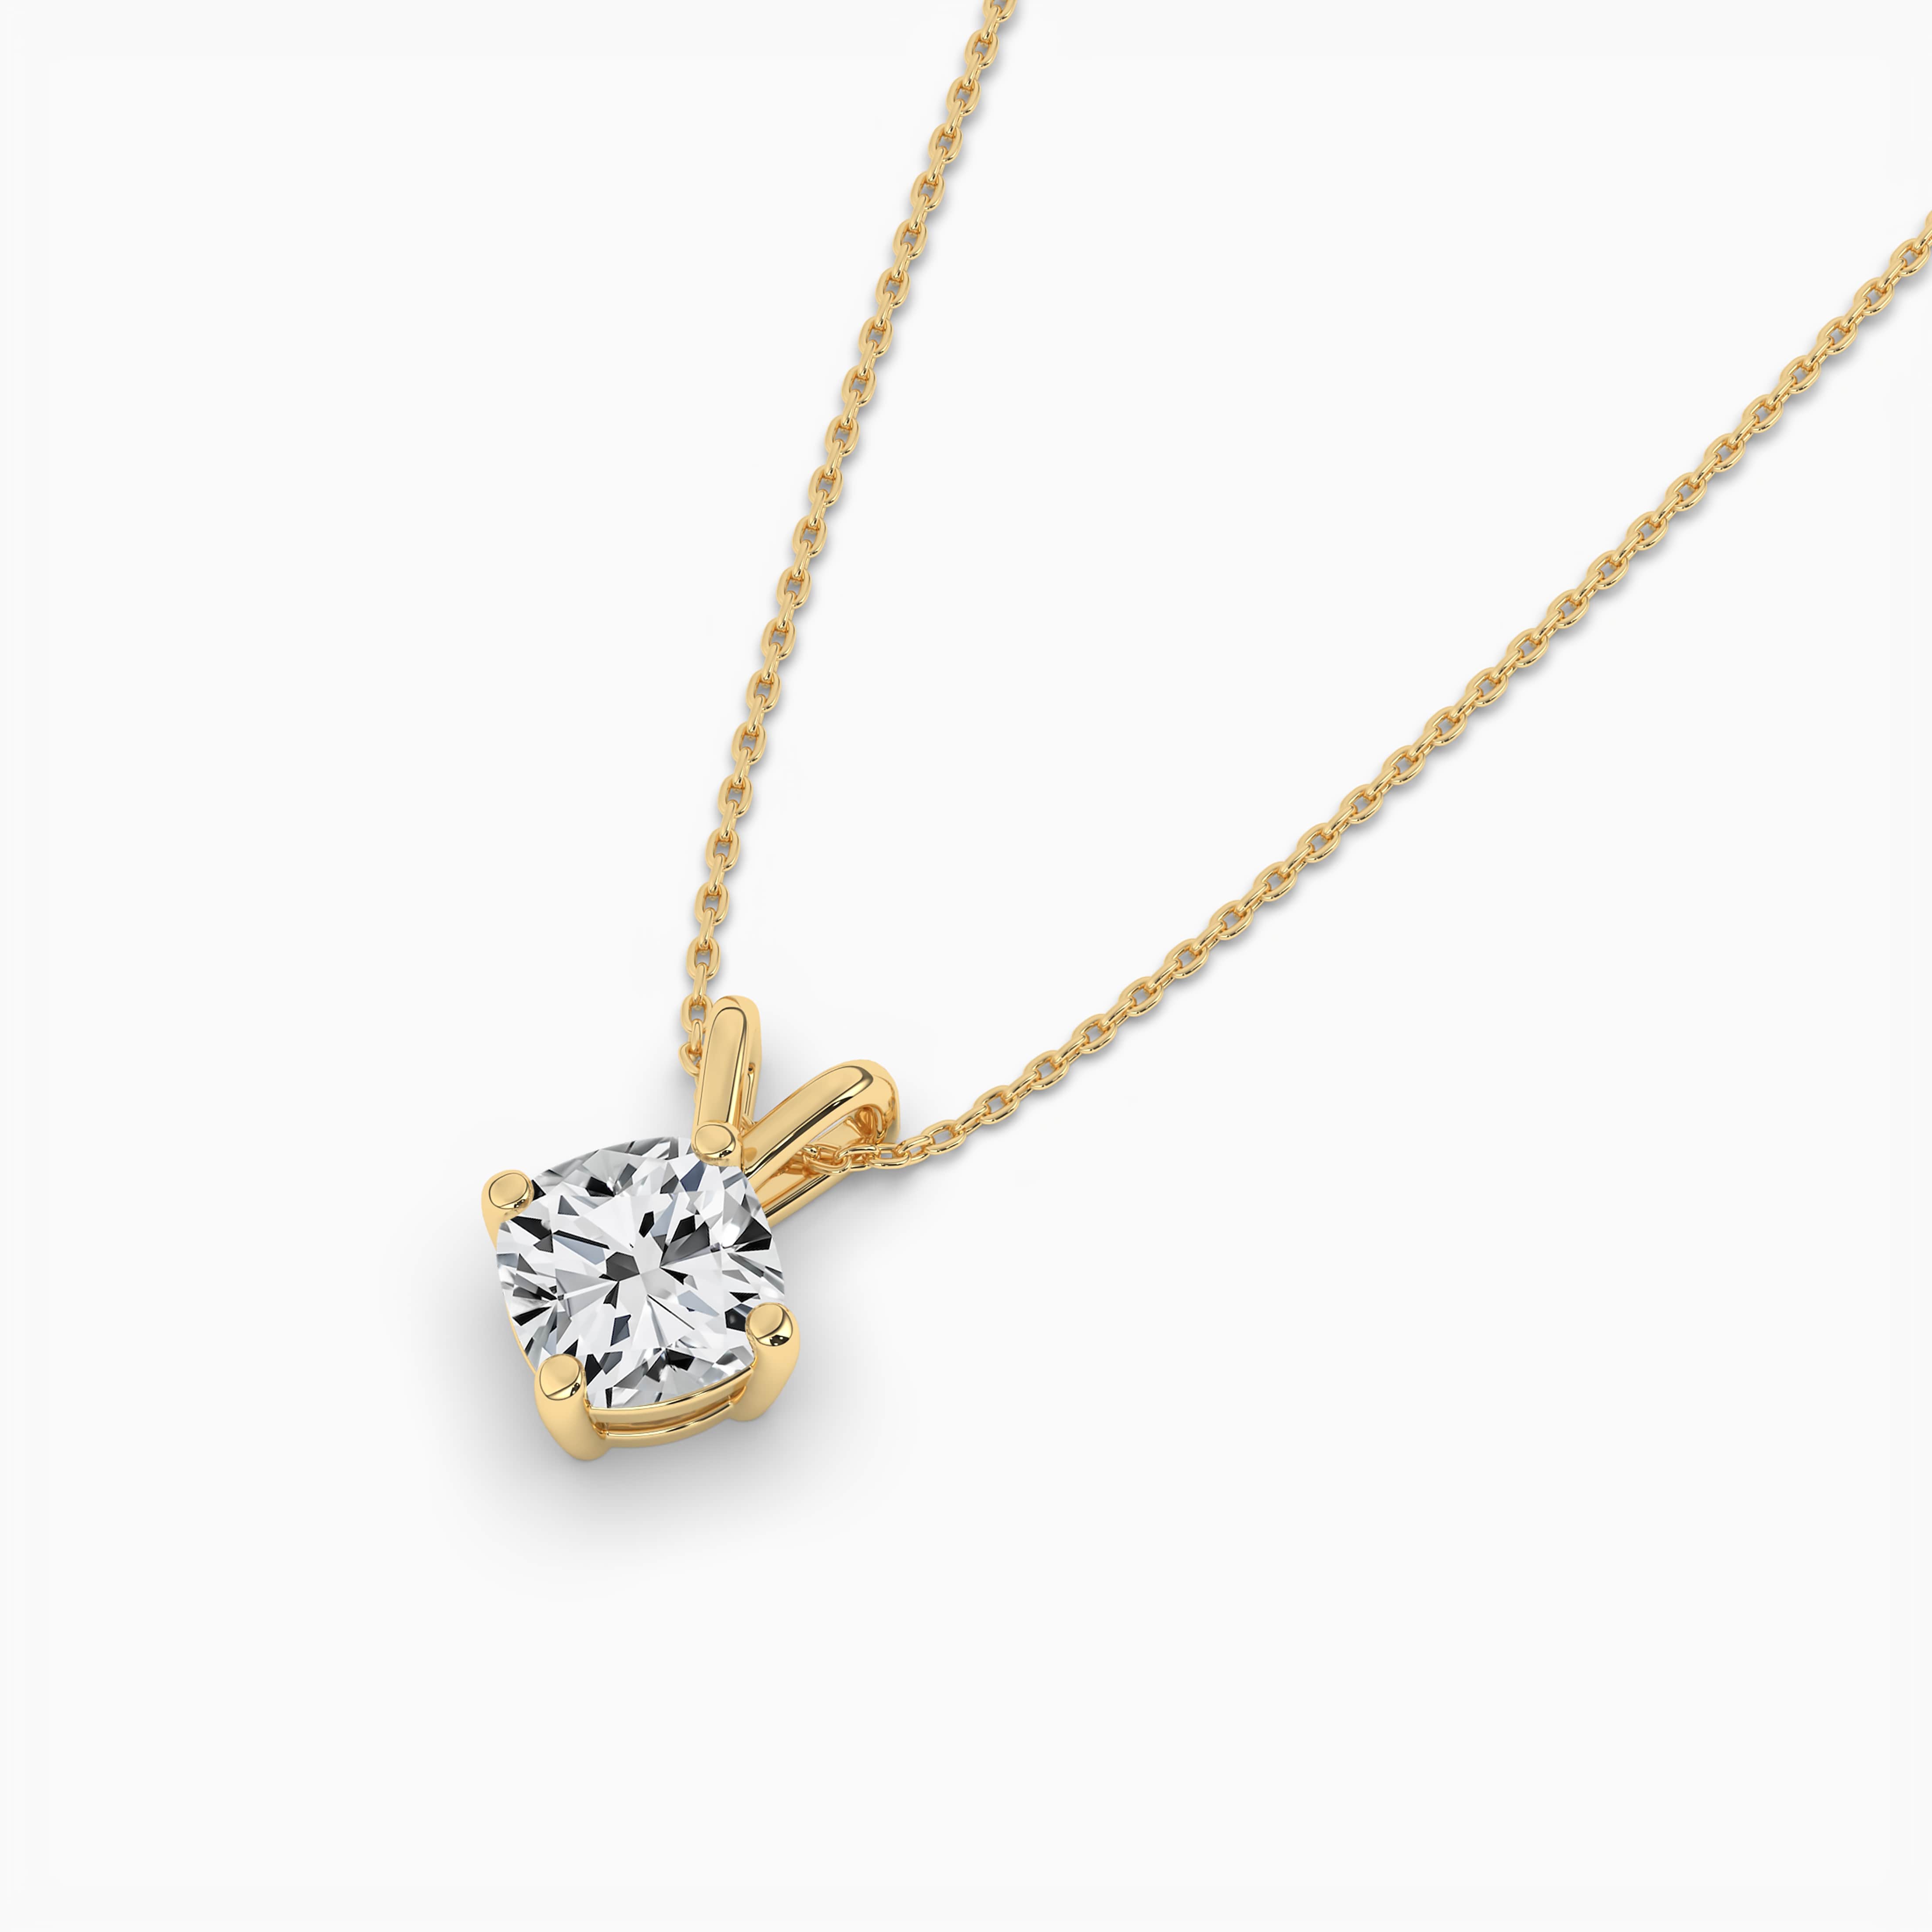 YELLOW GOLD PAVE CUSHION NECKLACE